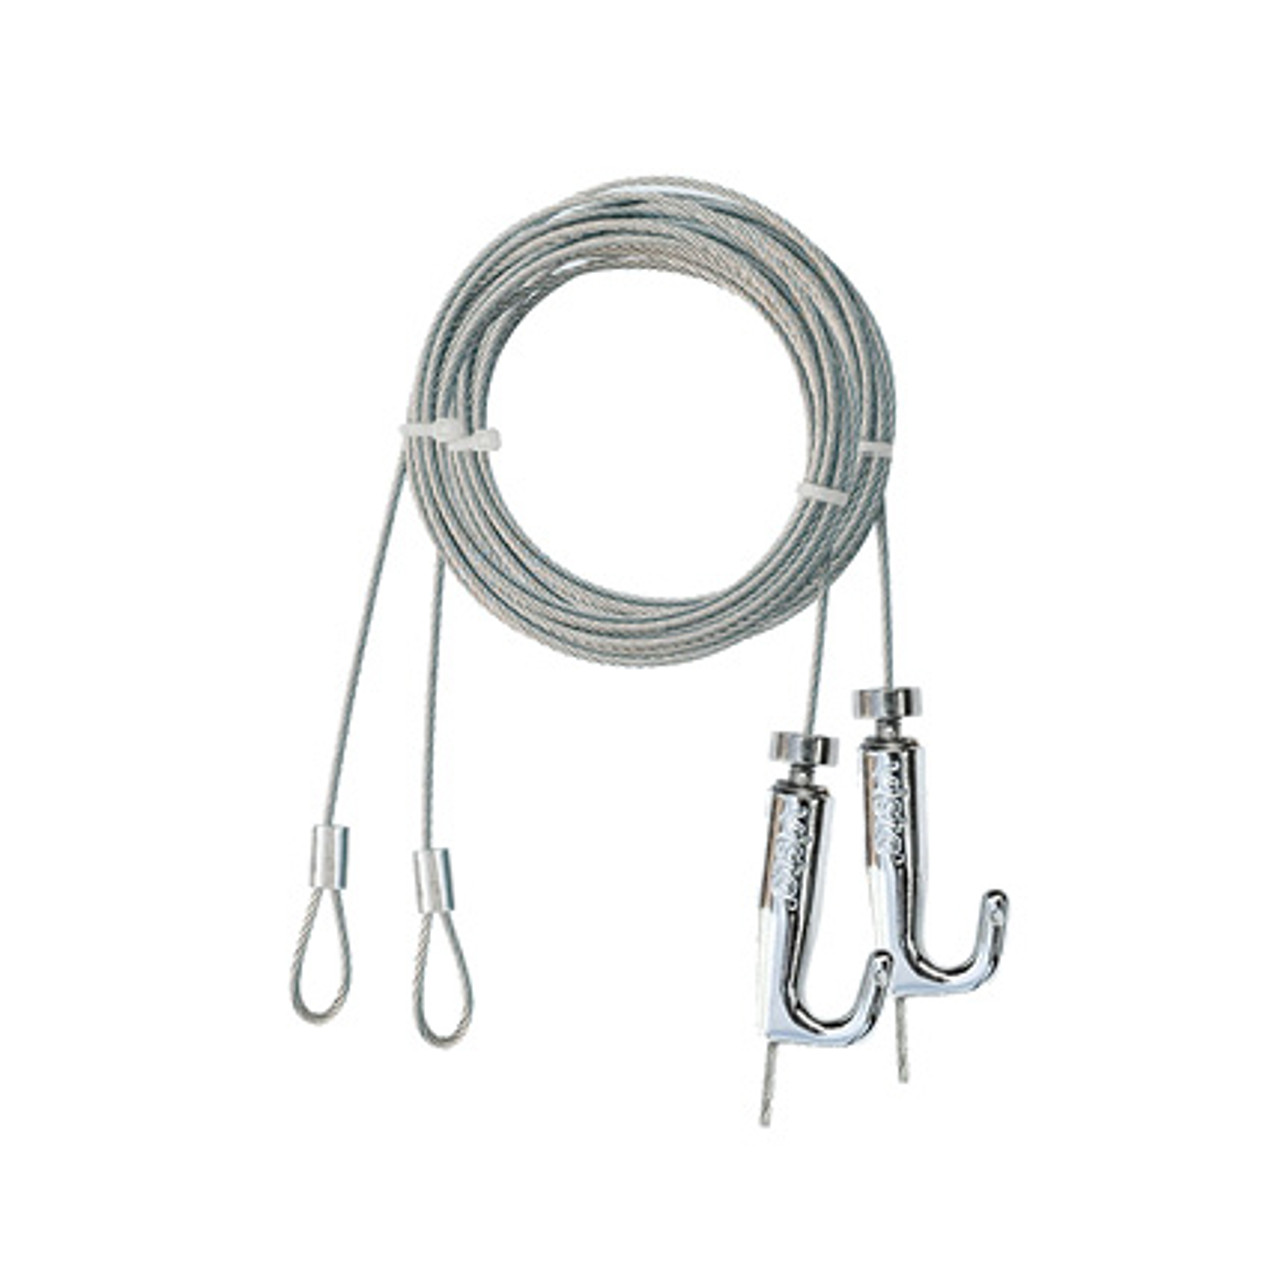 Ceiling Mounted Cable Hanging Kit with Hooks - Pack of 2